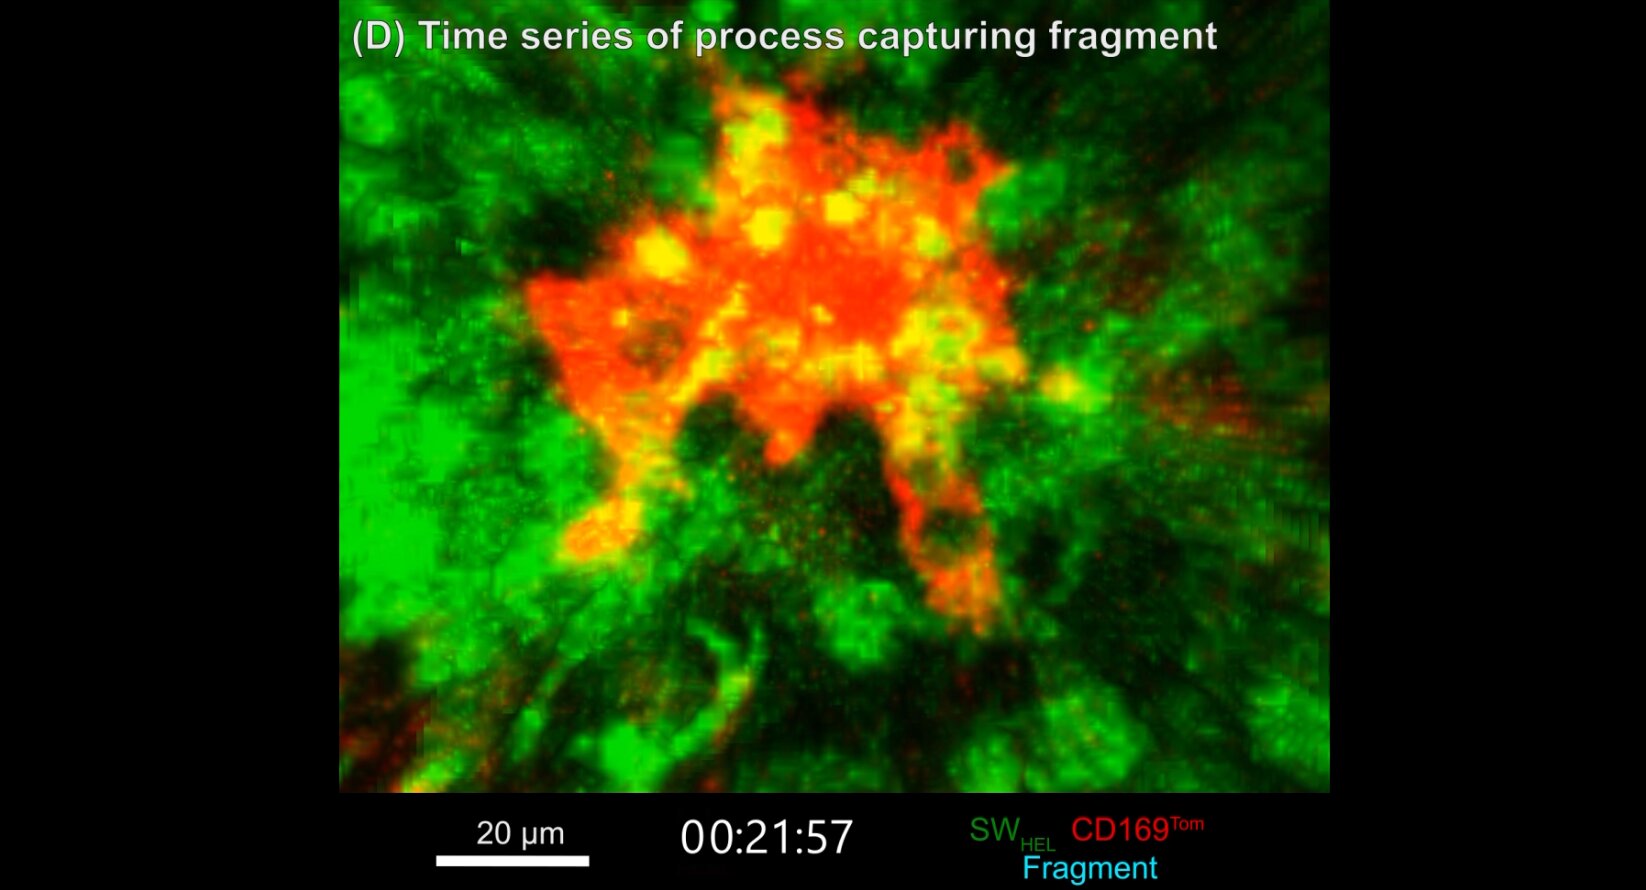 2-Photon microscope image of the germinal centre inside a lymph node, showing B cells (green) moving around and a tingible body macrophage (red) grabbing the dead and dying B cells